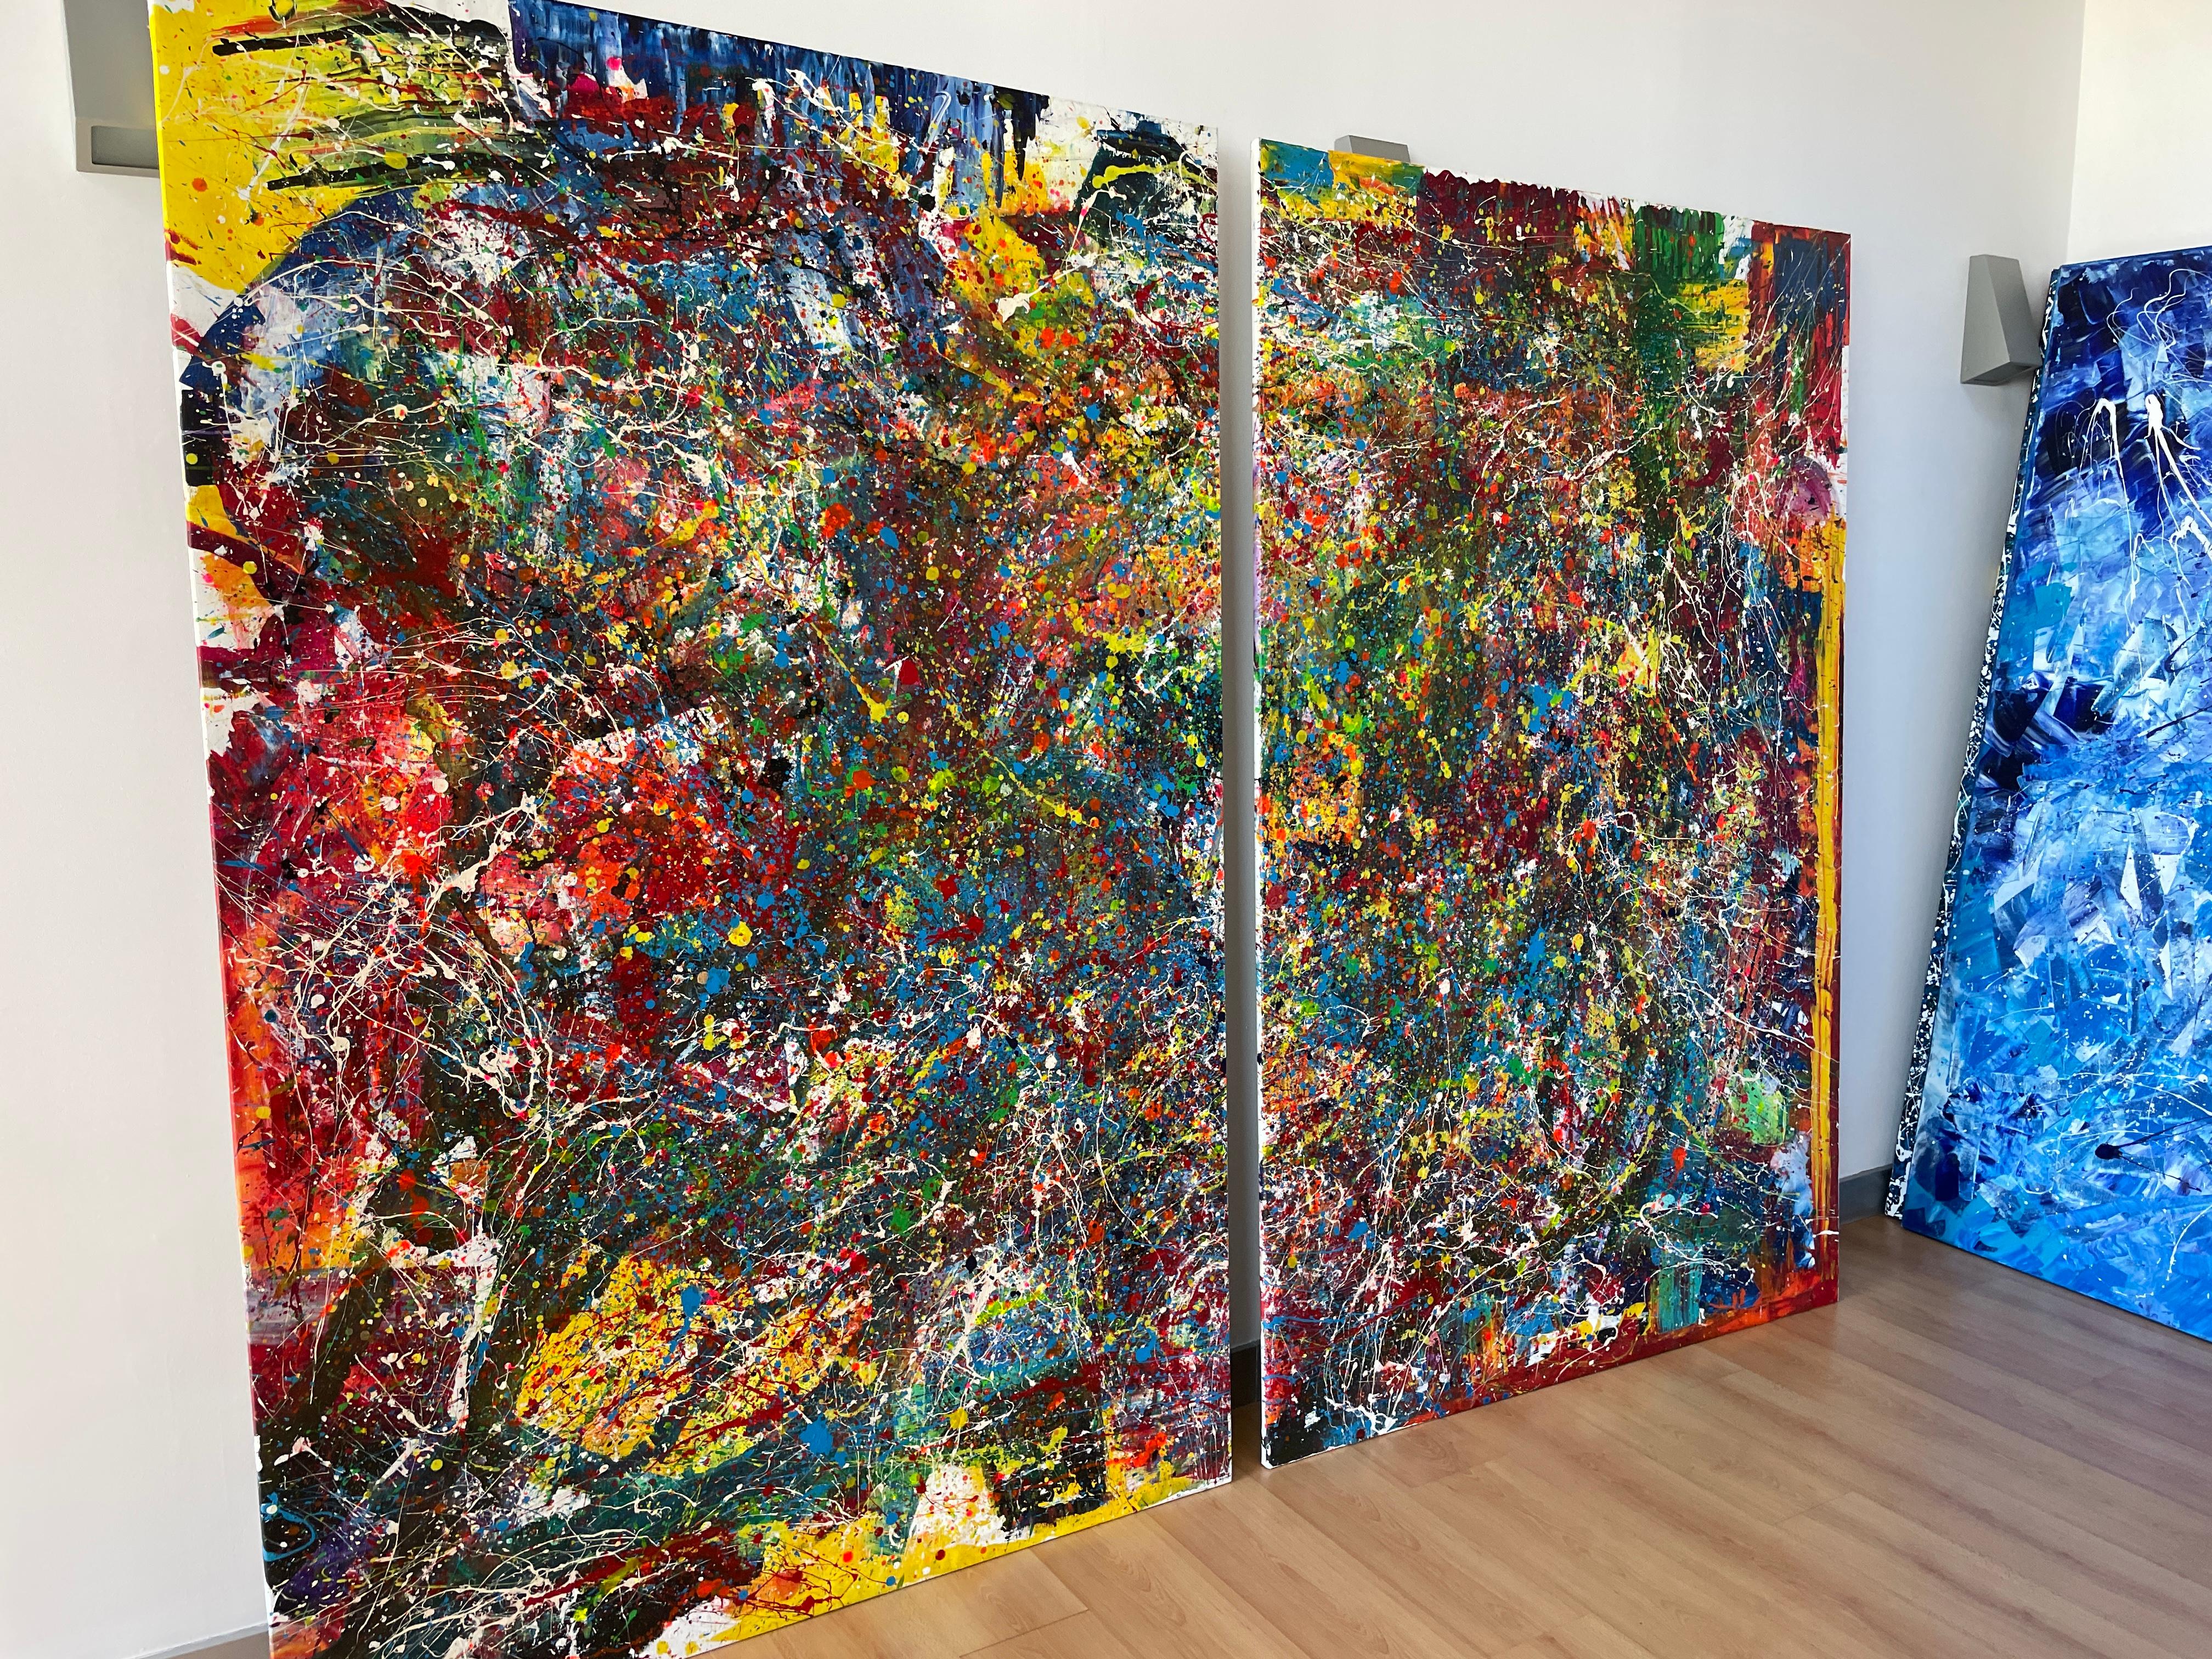 Due to the size of the work, it was Shipped rolled in a tube without a frame

Acrylic on Canvas

This work consists of two canvases ofDiptych 103,93H x 78,74W x 0,1D – 51,96Wx78,74Hx0,1D
DIPTICO 264 W x 200 H x 0.1D cm / 2x132Wx200Hx0.1D cm

This 